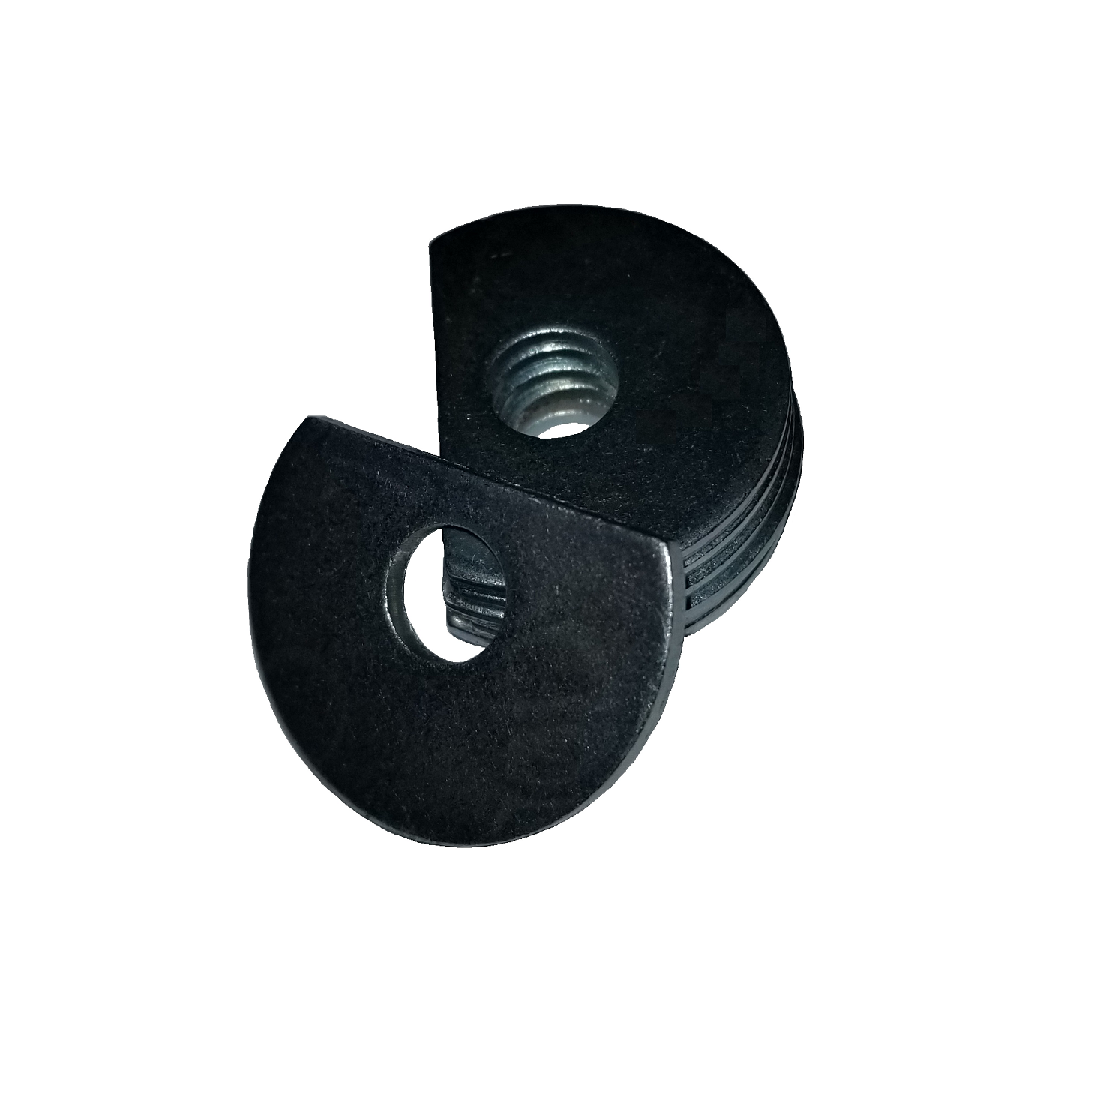 Clipped OD Washer - 0.812 ID, 1.469 OD, 0.156 Thick, Spring Steel - Hard